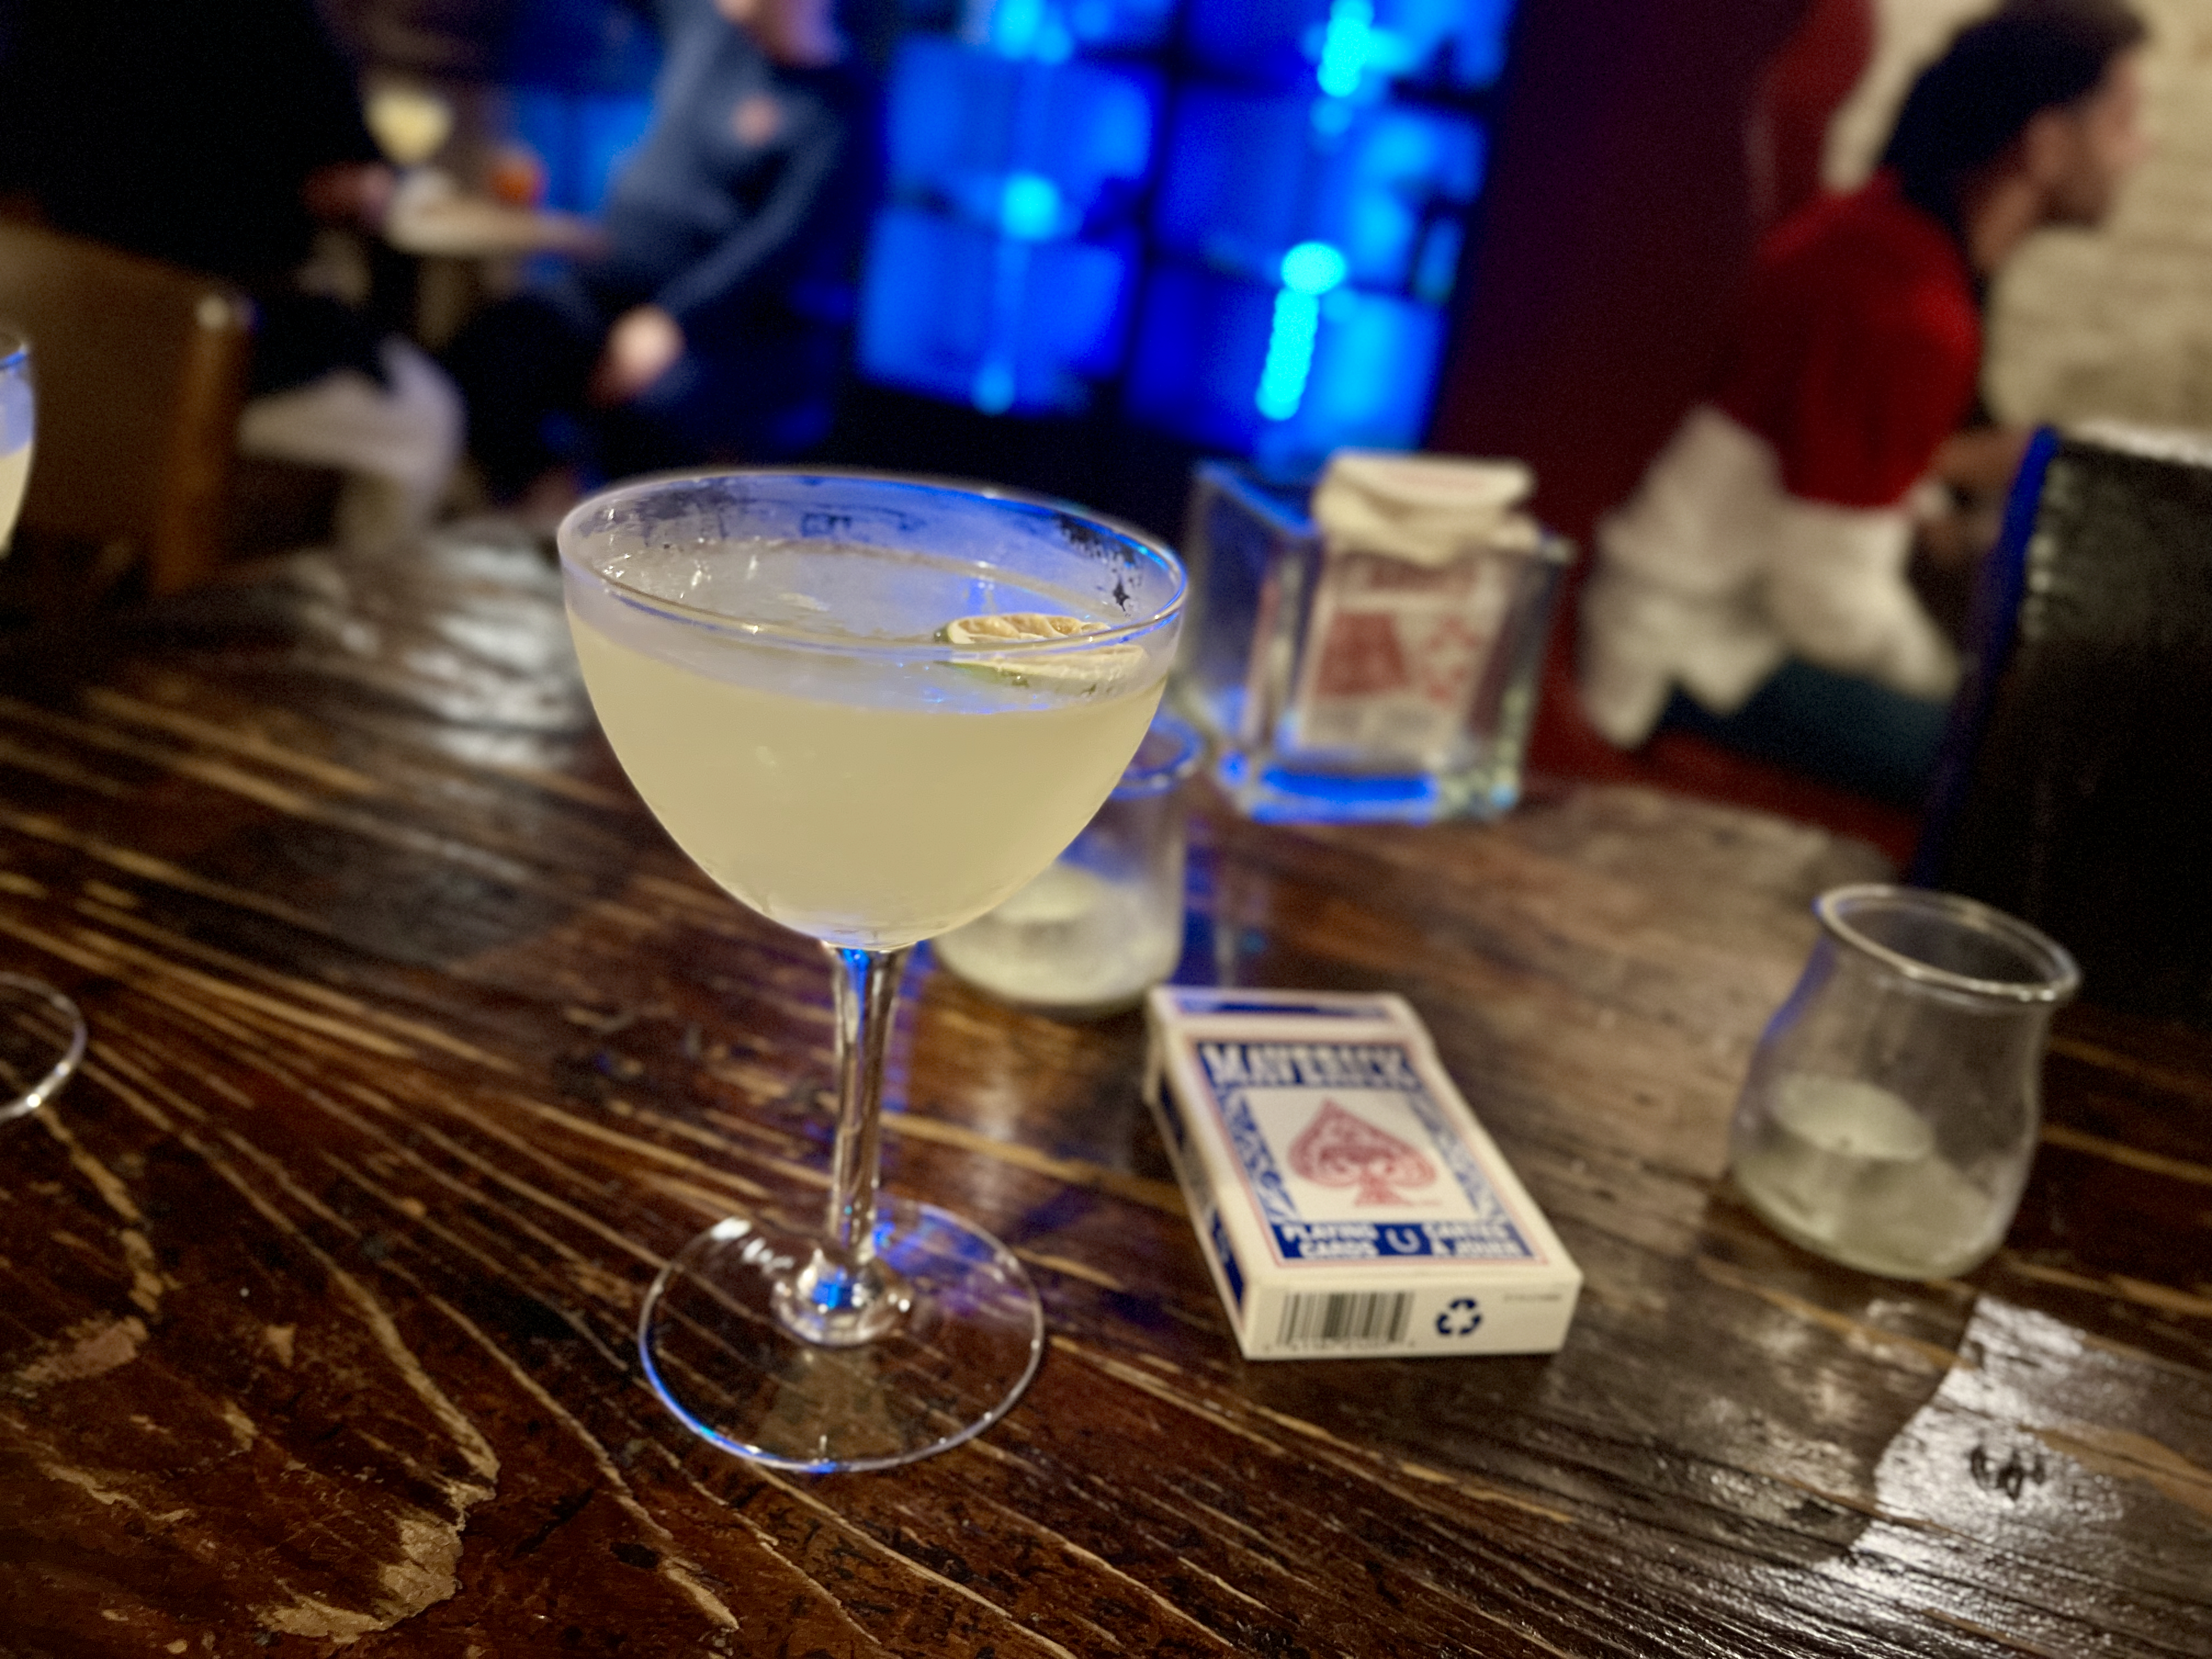 Speakeasy drink and deck of cards